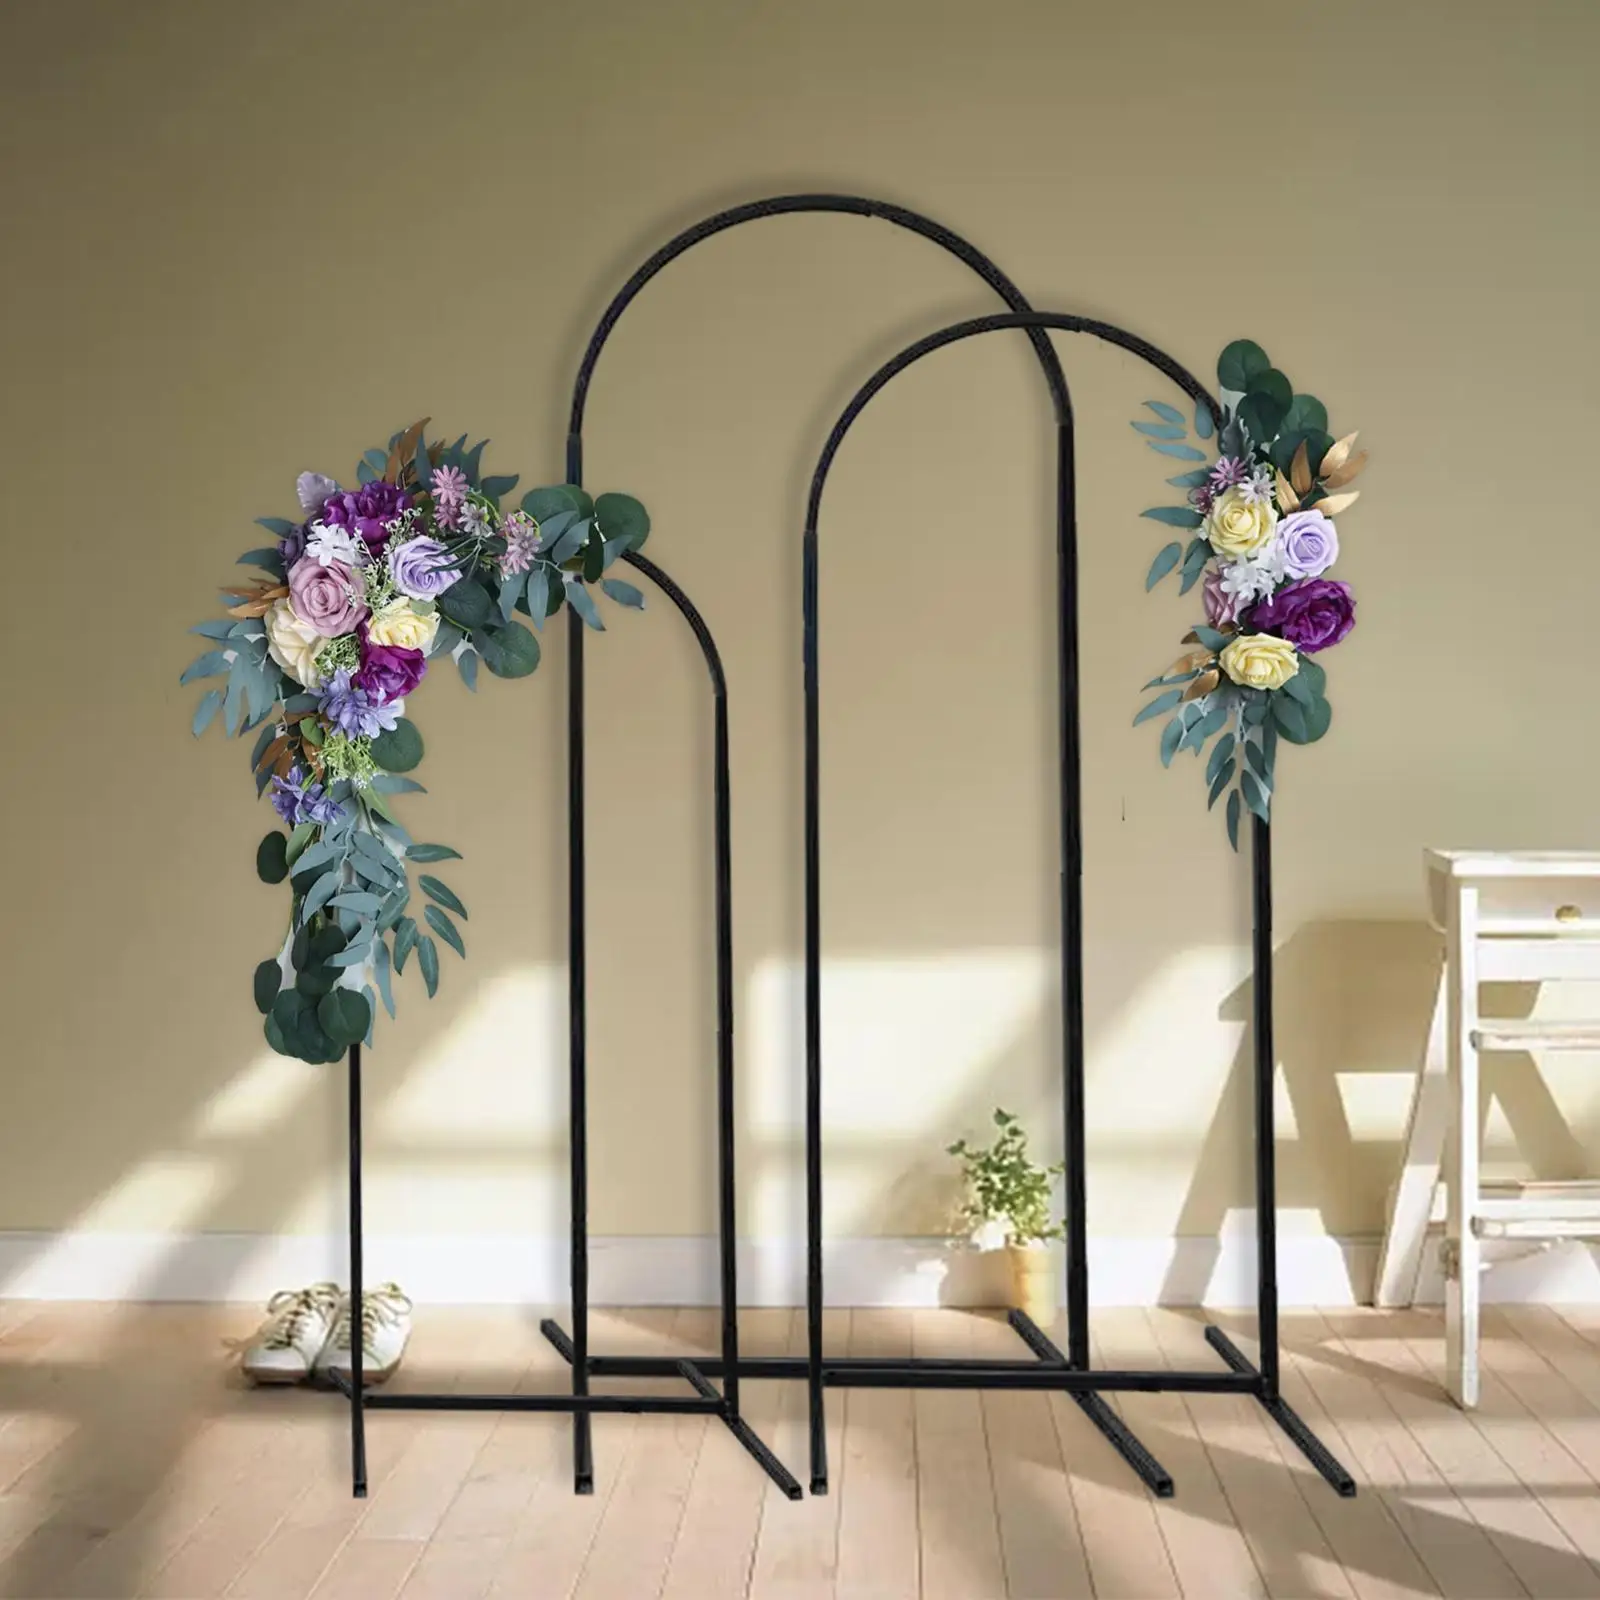 Artificial Flower Arch Decor Pueple Rose Flower Decor for The